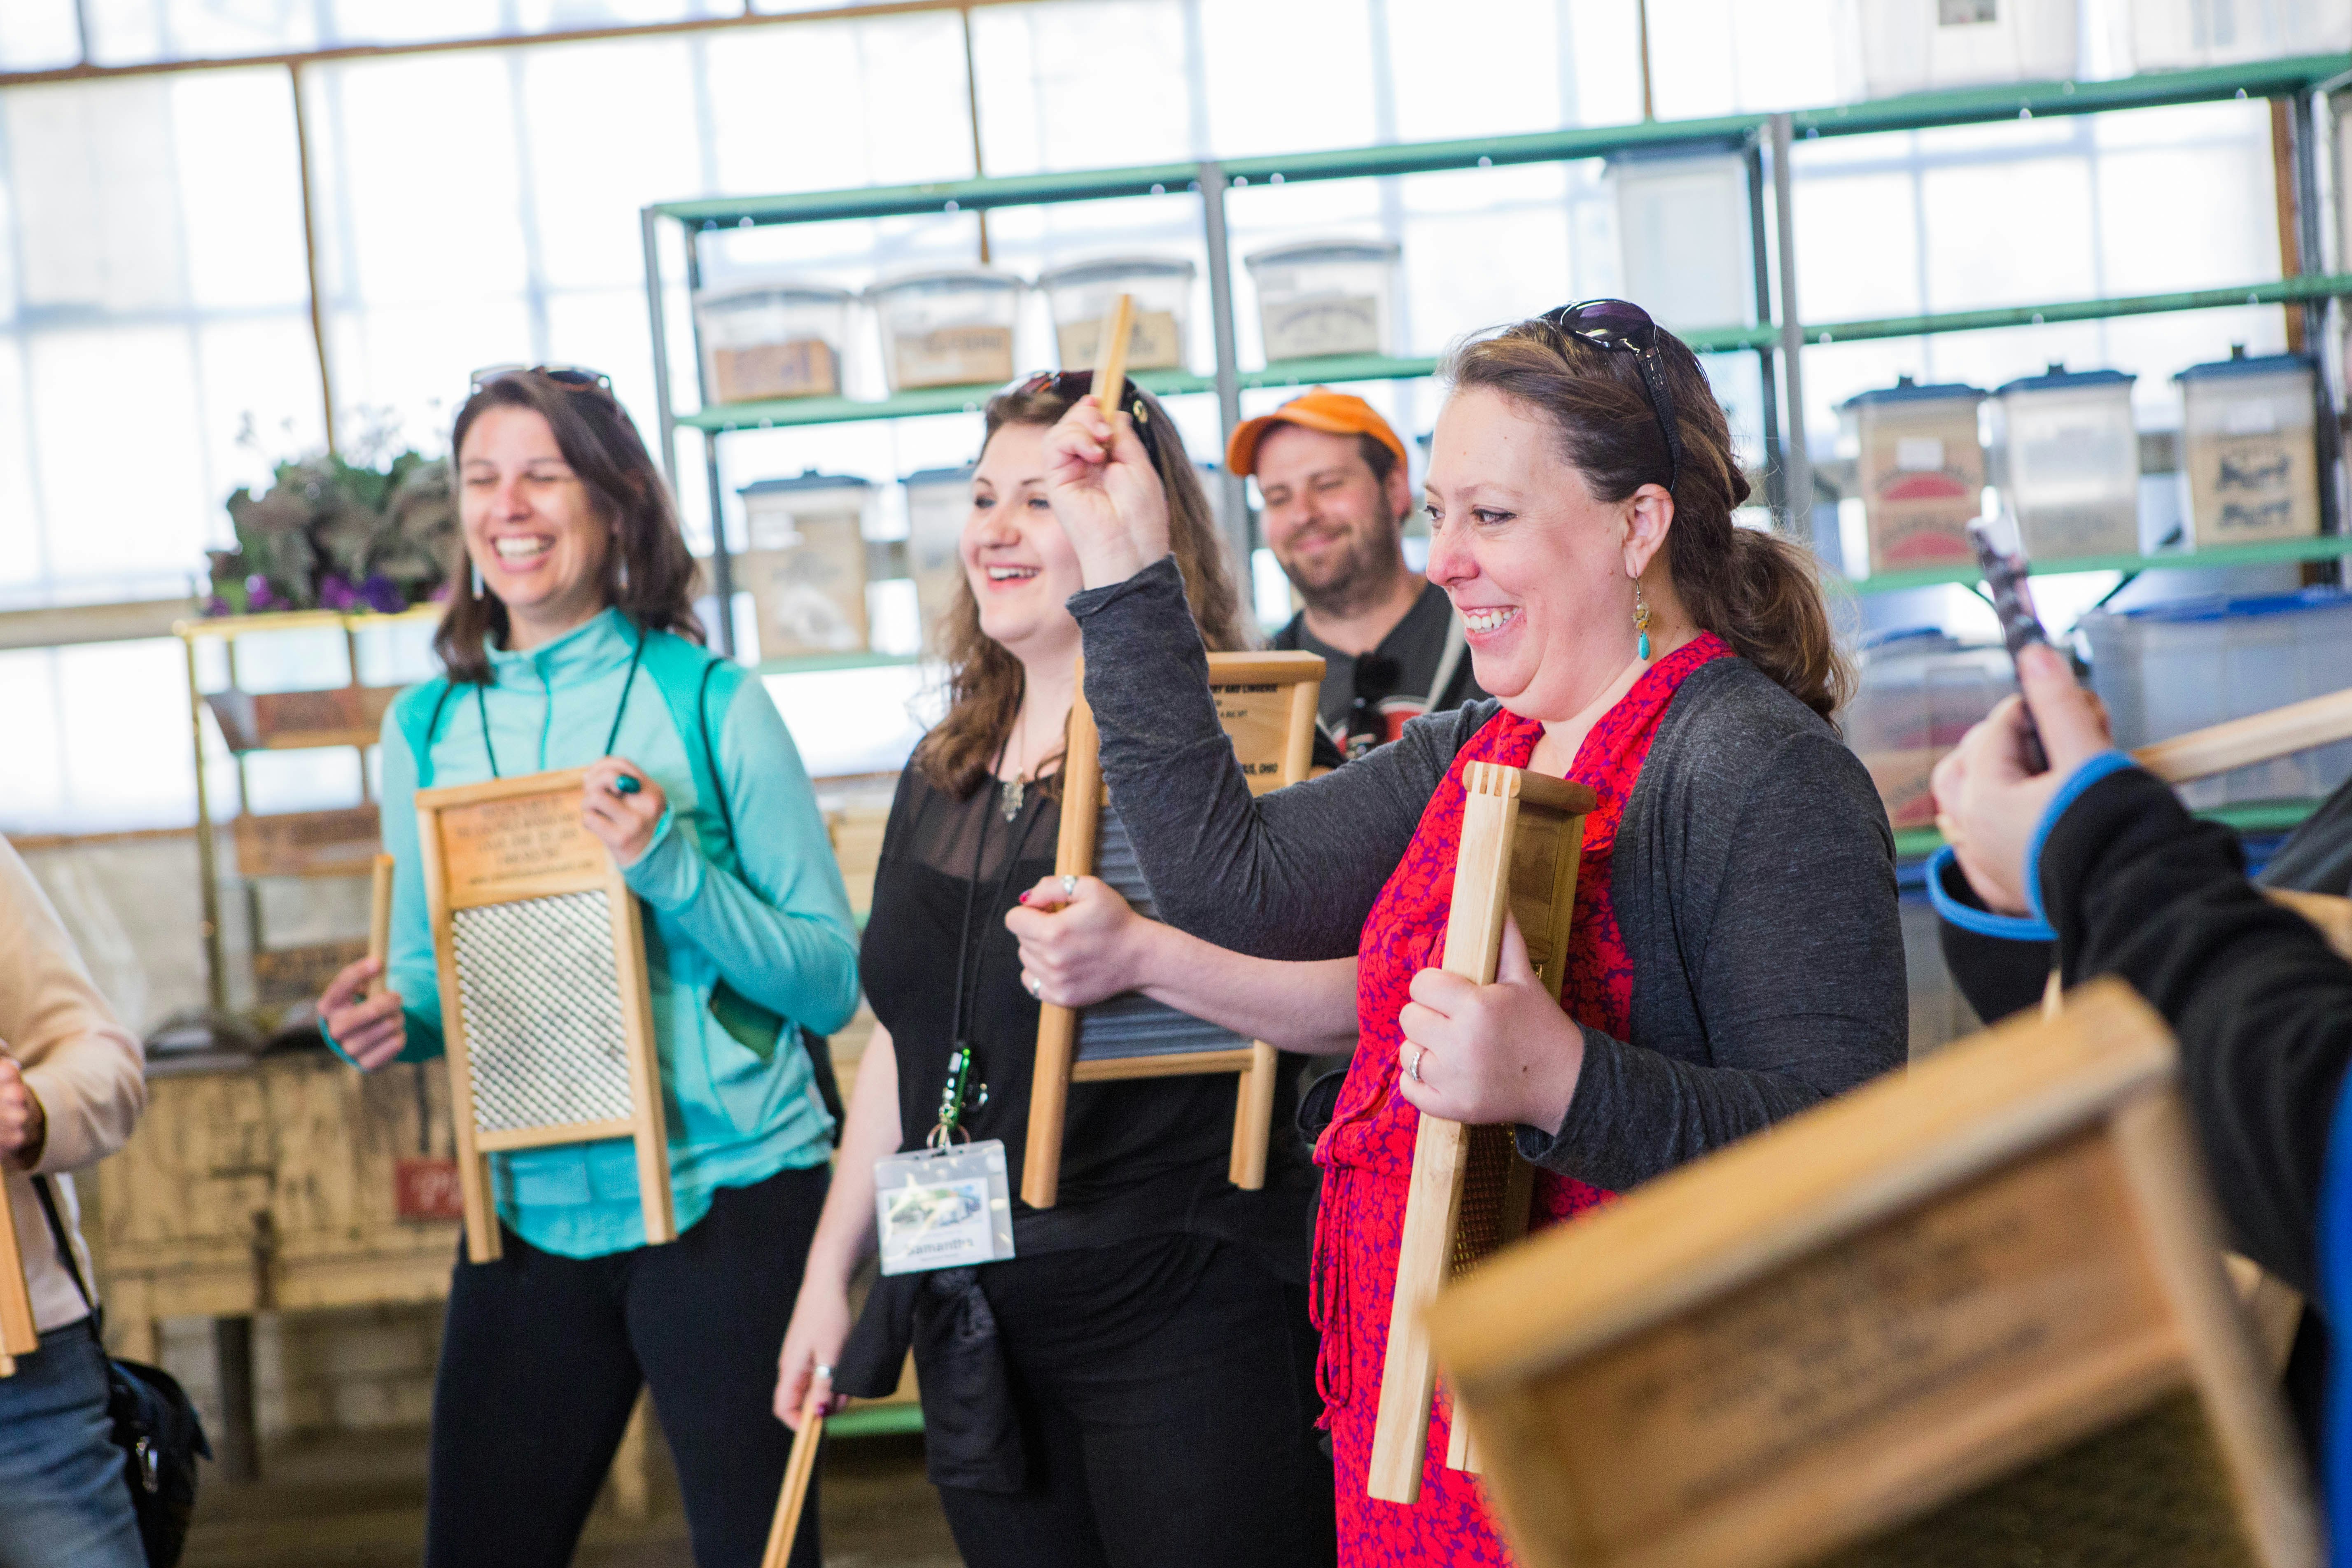 Three women and a man, all smiling and laughing, play washboards as musical instruments at the Columbus Washboard Company as part of their tour of the factory.